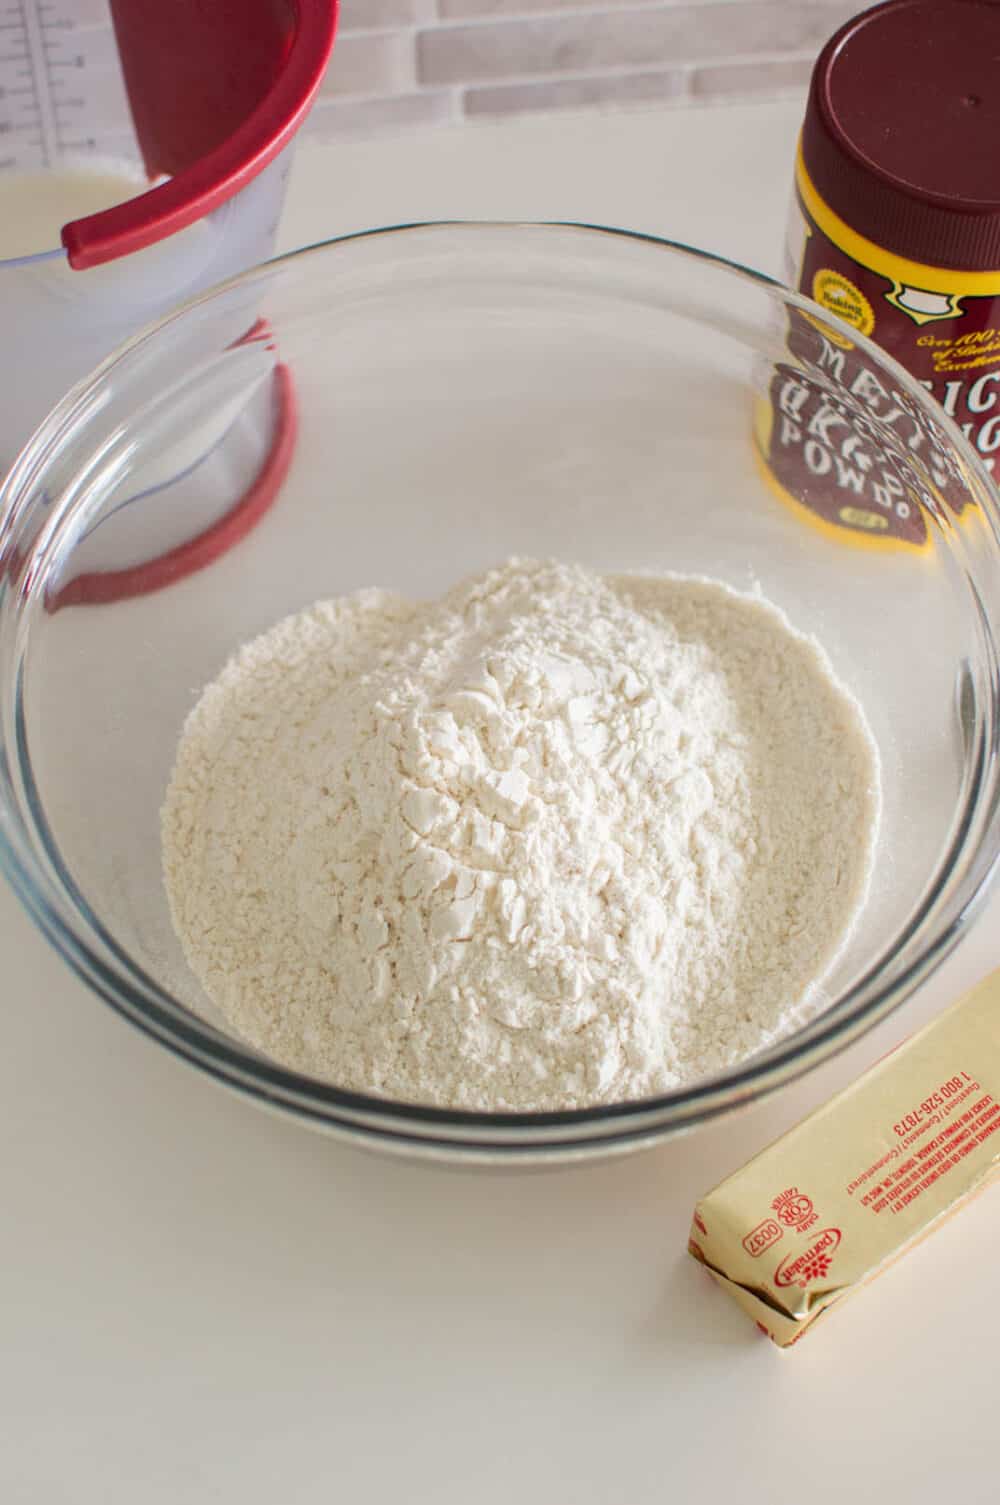 All-purpose flour in a glass bowl, surrounded by additional ingredients